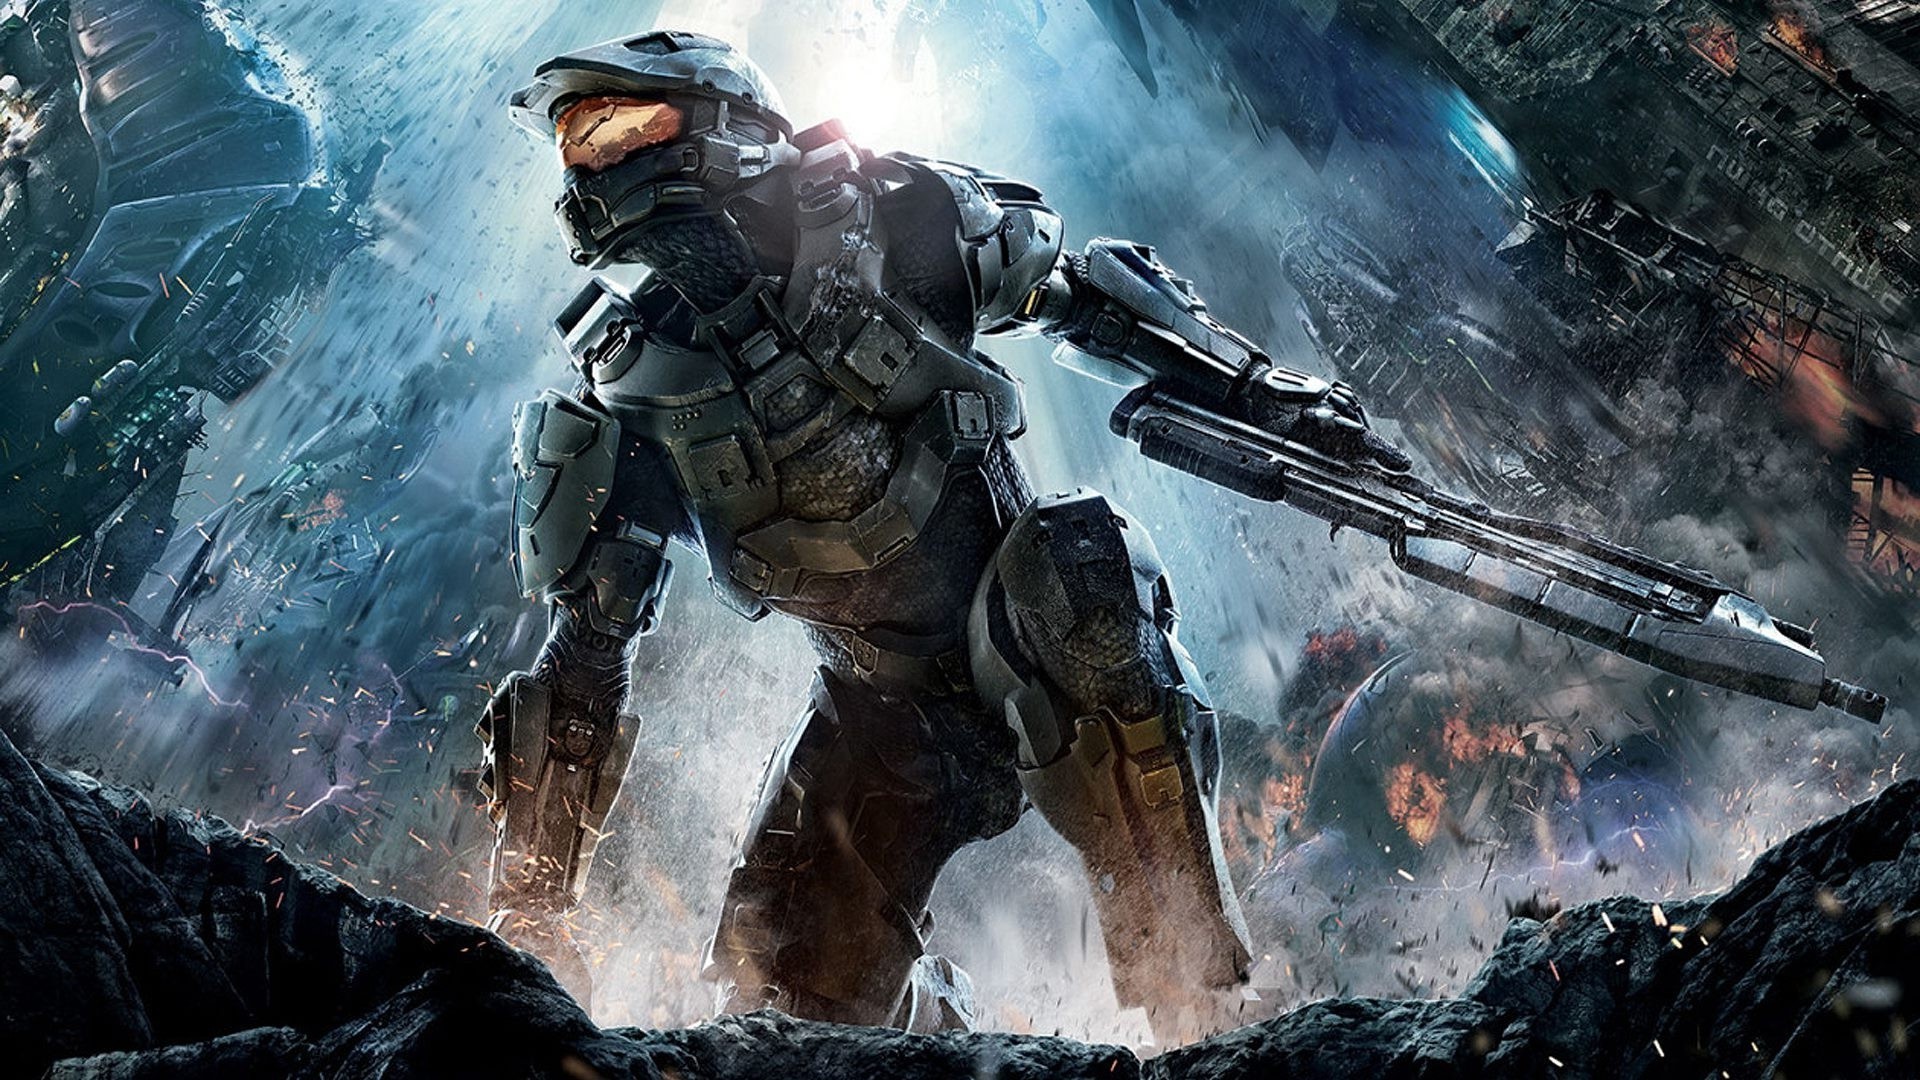 Halo 4 Wallpapers